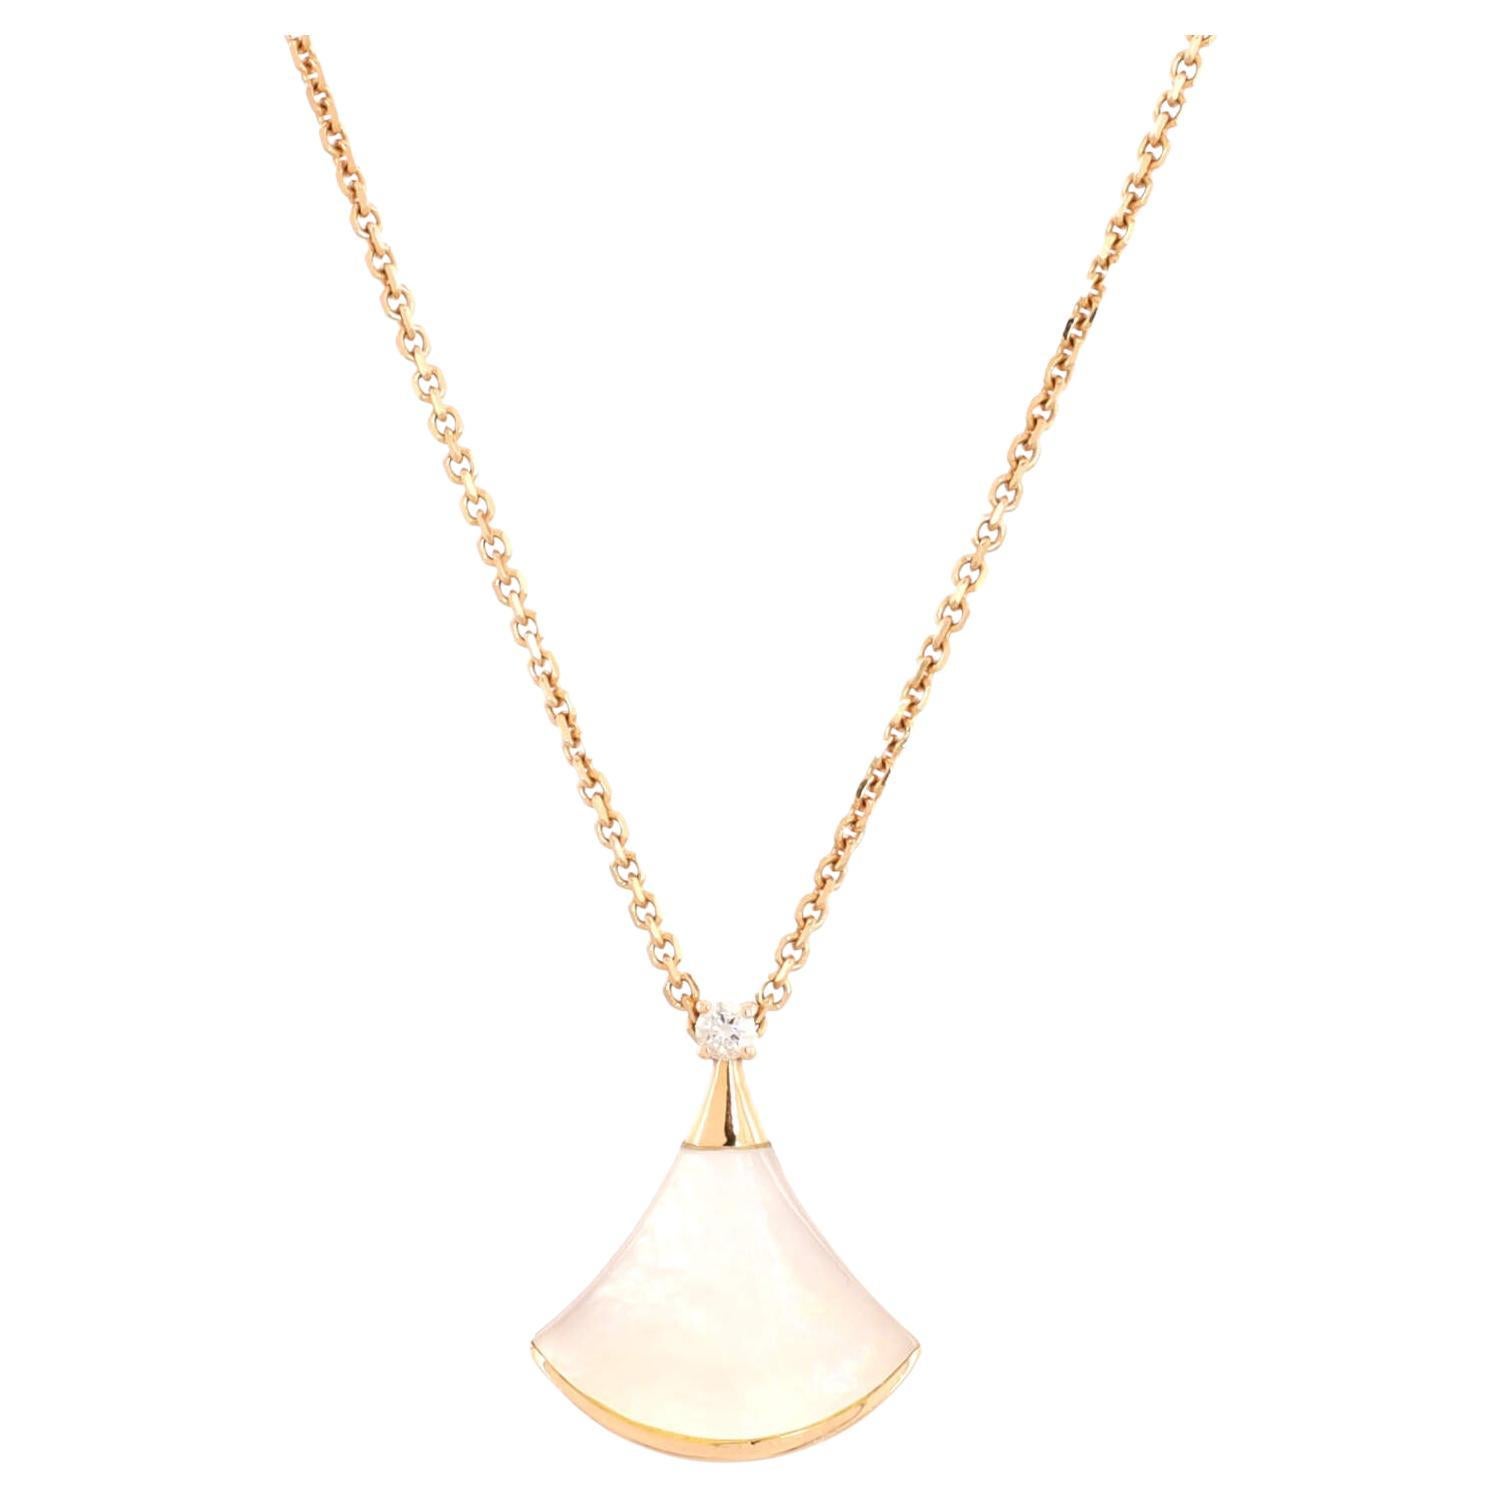 Bvlgari Diva's Dream Pendant Necklace 18k Rose Gold with Mother of Pearl